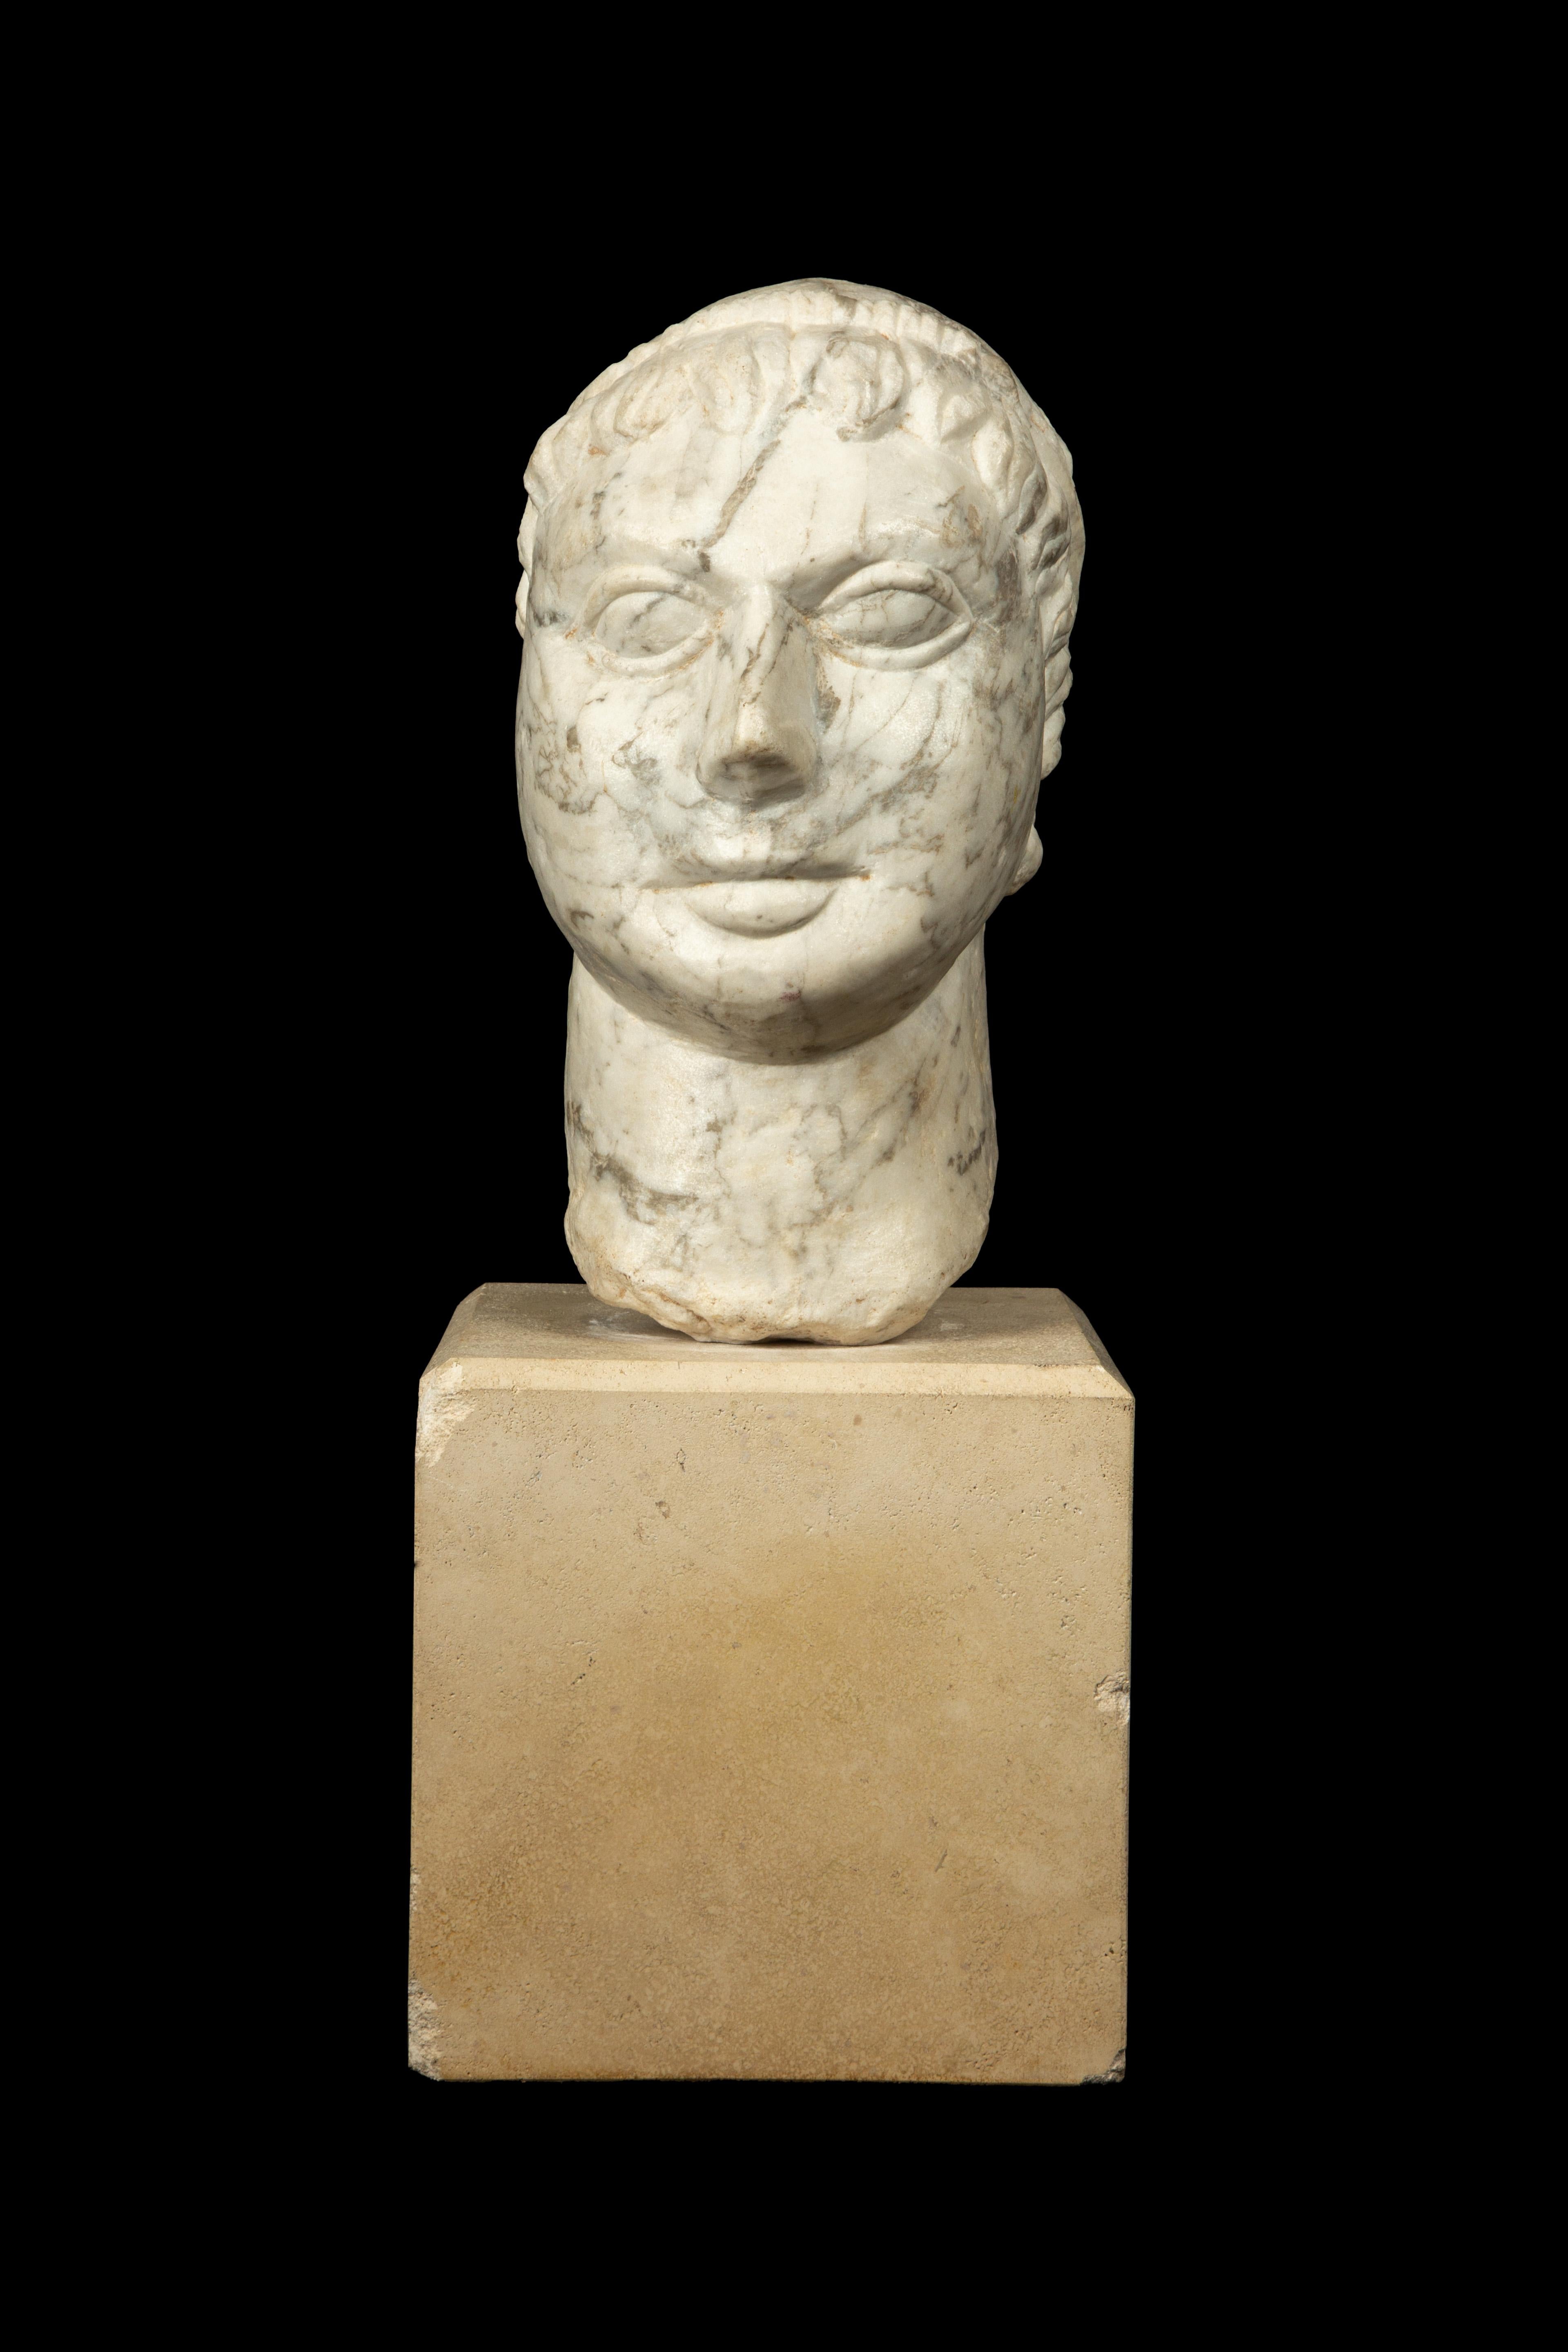 This marble head showcases a man in the antique style, wearing a laurel crown. It is presented on a square stone base, emphasizing its classical elegance and symbolizing achievement. The sculpture is a beautiful reminder of the timeless appeal of